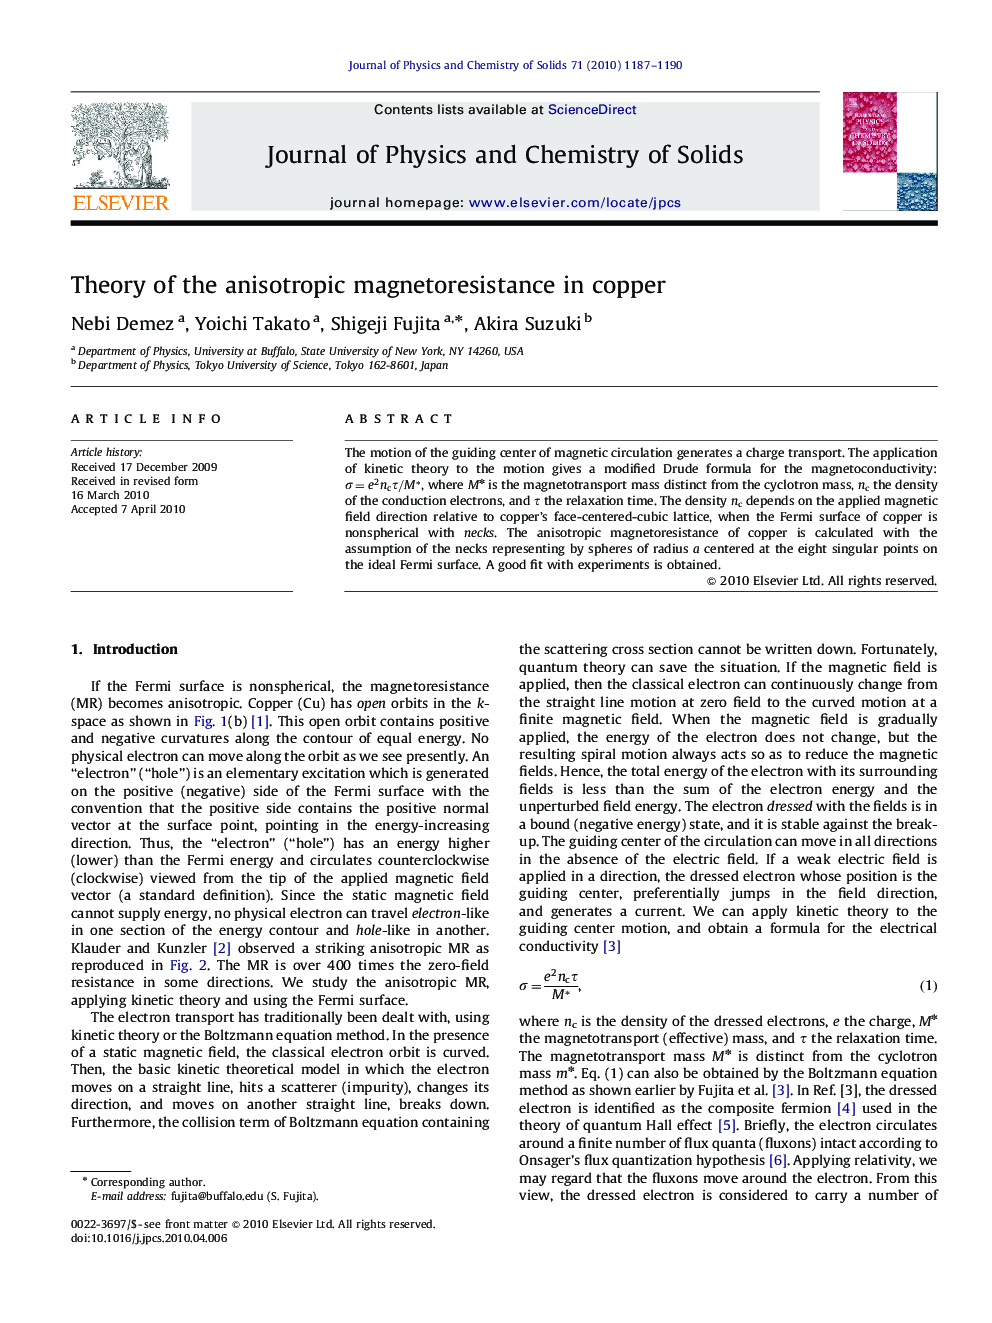 Theory of the anisotropic magnetoresistance in copper